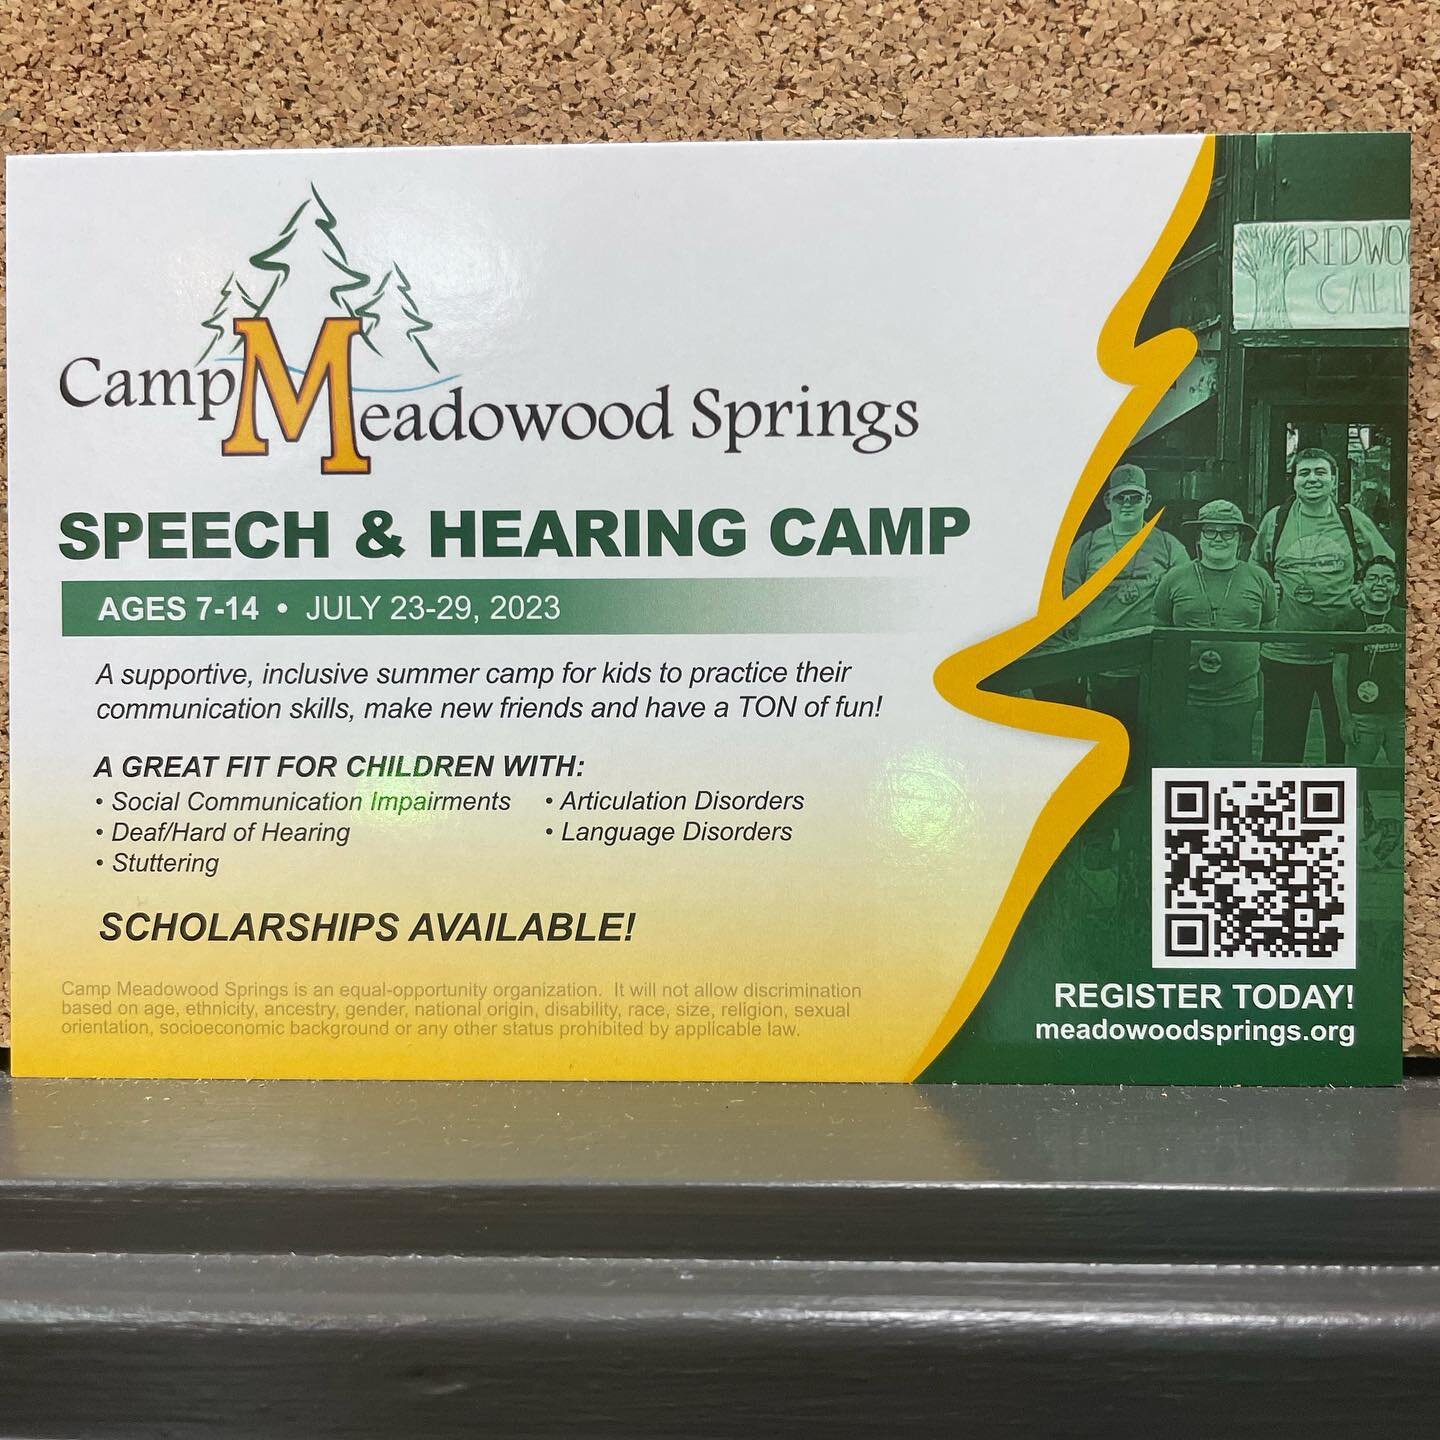 If you&rsquo;re the parent of a child with social communication impairments, deaf, or stuttering, we&rsquo;ve got exciting information to share.

Camp Meadowood Springs has a Speech and Hearing camp coming soon!
-July 23-29
-Ages 7-14

For more info,